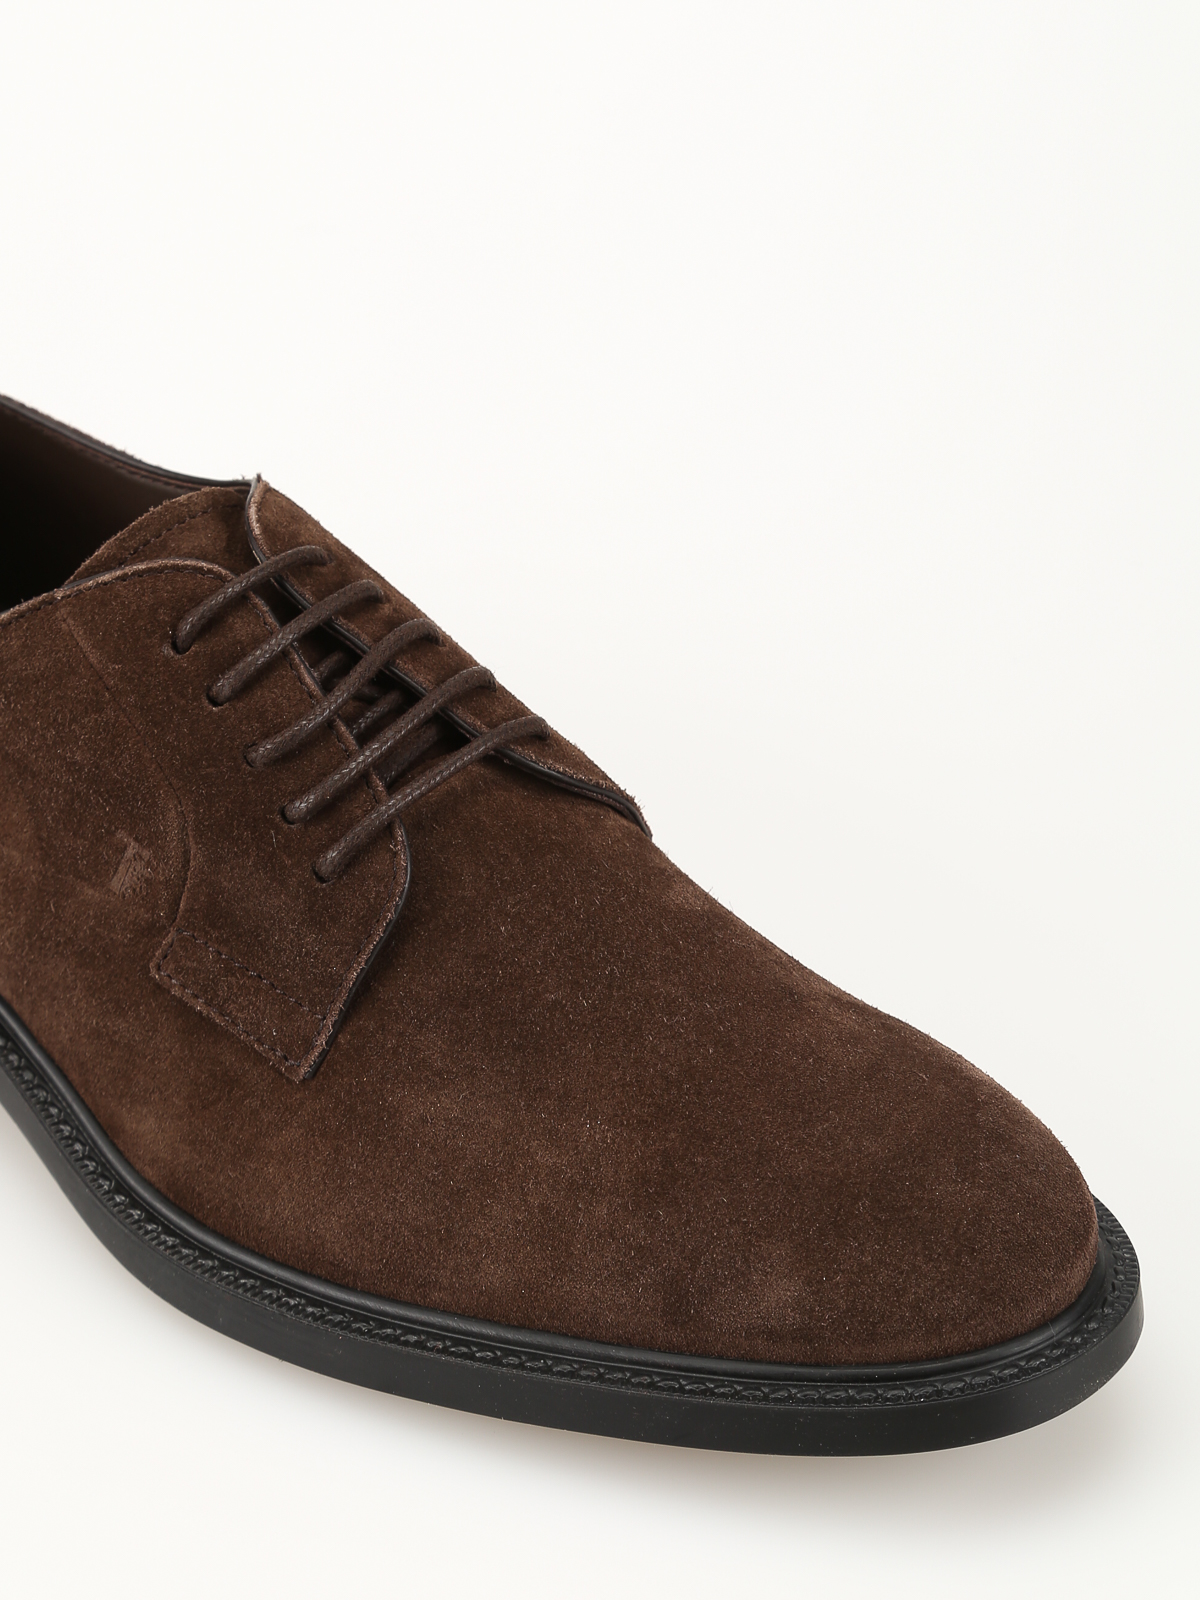 Mens Shoes Lace-ups Brogues for Men Hogan Suede Lace-up Shoes in Dark Brown Brown 